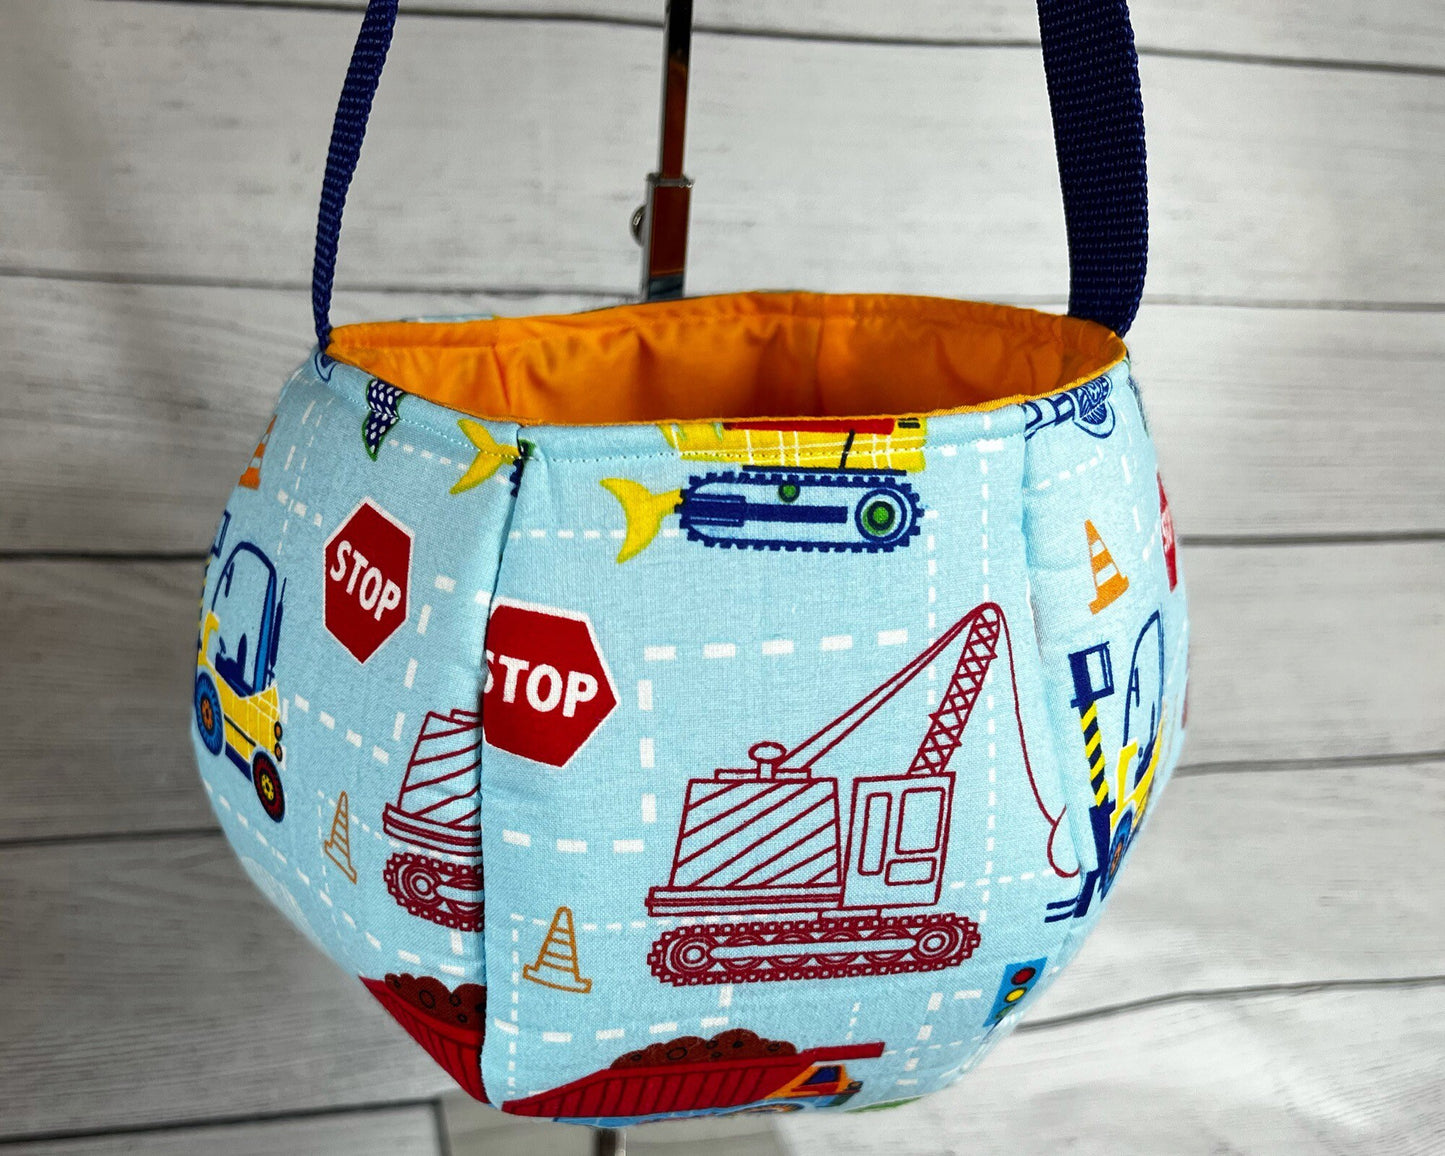 Construction Bag - Tote - Red Stop Sign - Wrecking Ball - Fork Lift - Excavator - Gift - Everyday - Holiday - Easter - Halloween - Party